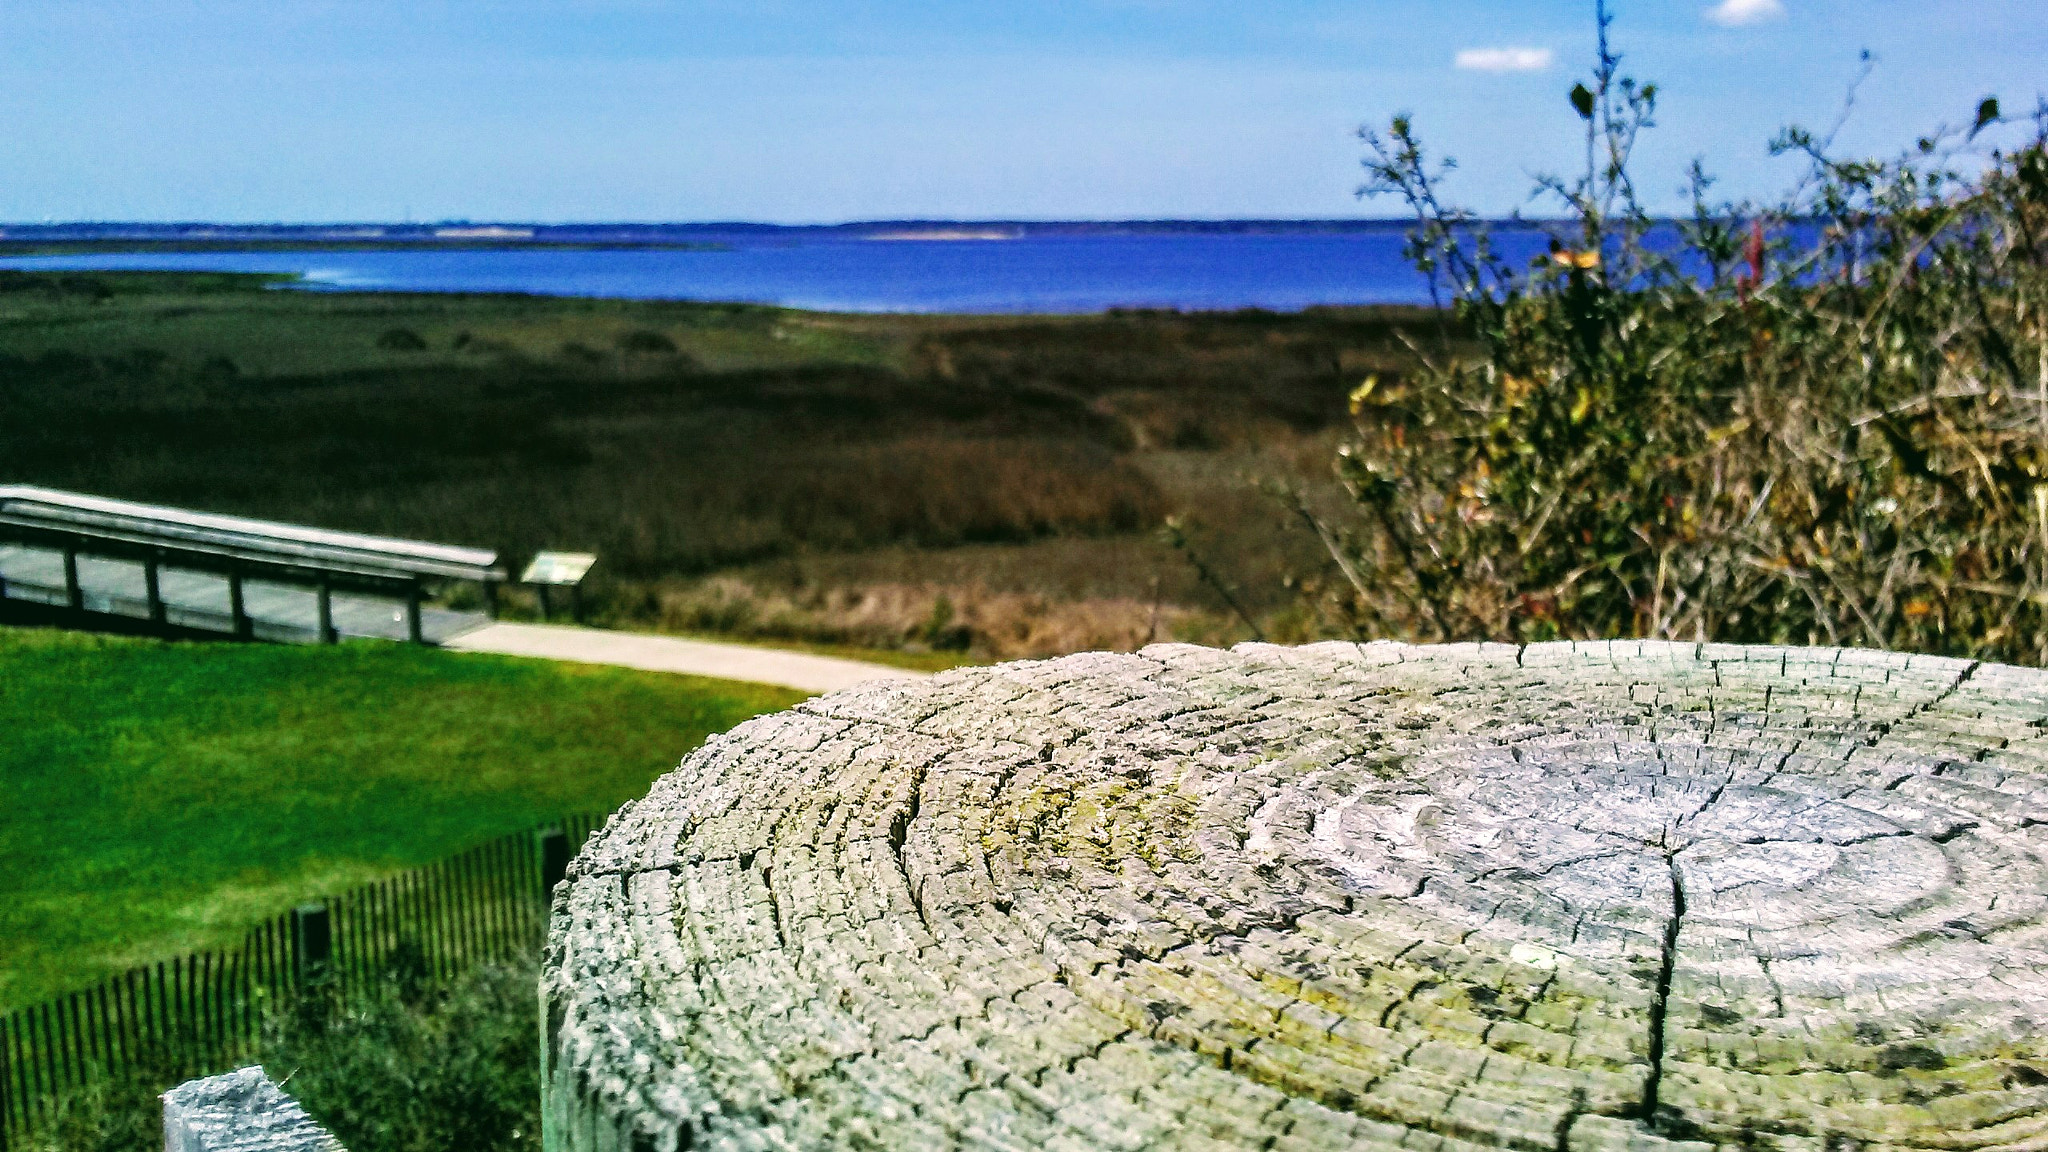 LG Phoenix 3 sample photo. Sunny day over fort fisher photography